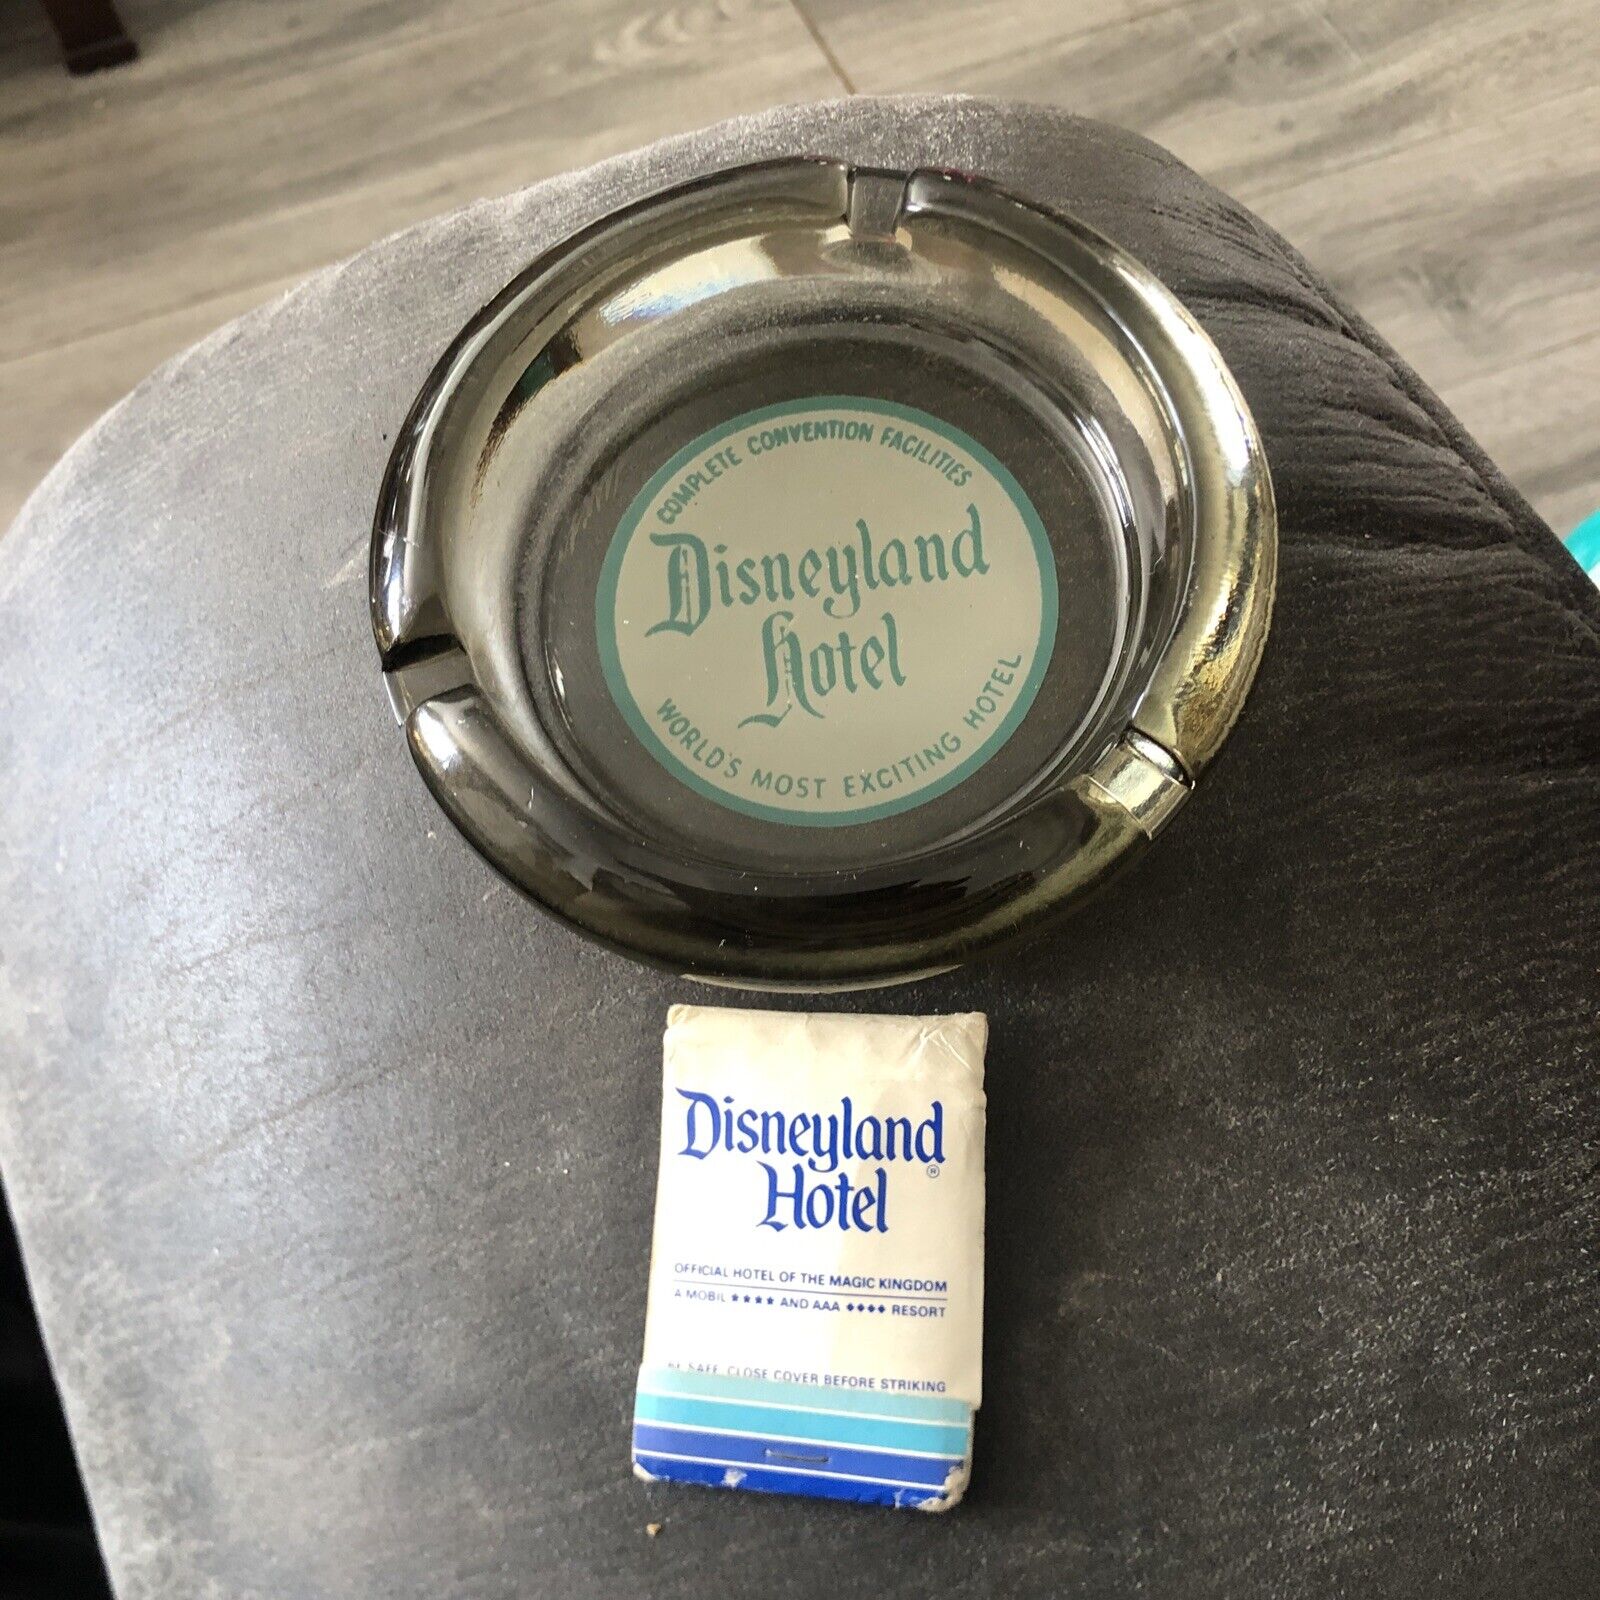 Vintage Disneyland Hotel Ashtray With Smokey Glass & 1 Matchbook With Matches